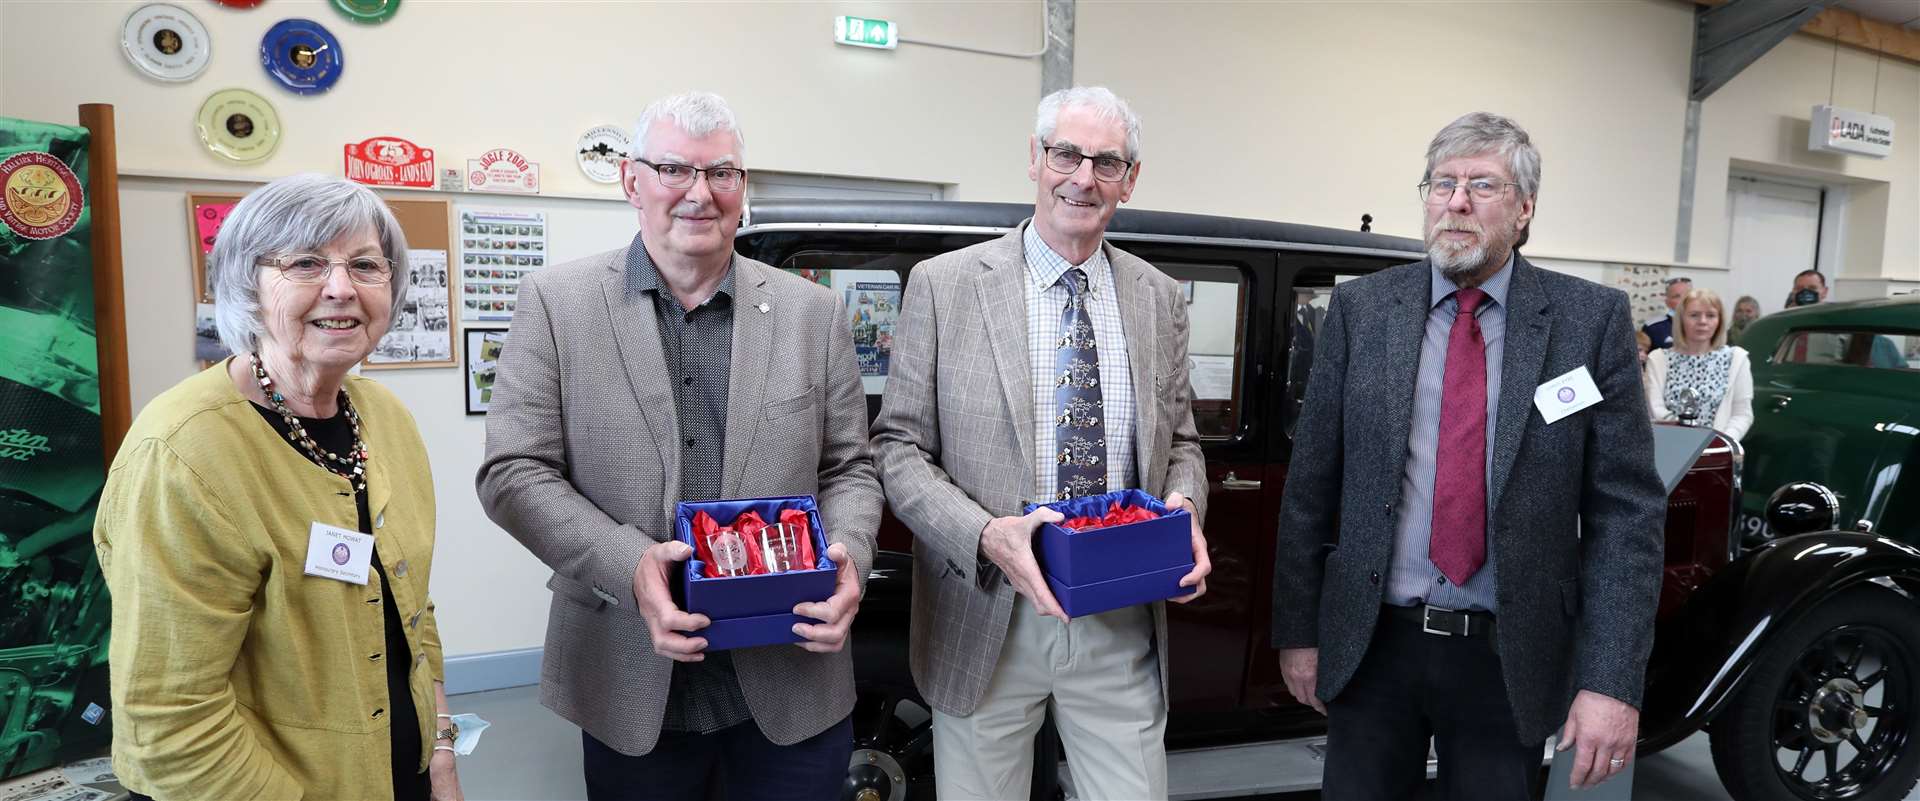 Iain and Alasdair Sutherland are presented with glass mementoes by Janet Mowat and Chris Eyre, secretary and chairman respectively of Halkirk Heritage and Vintage Motor Society. Picture: James Gunn